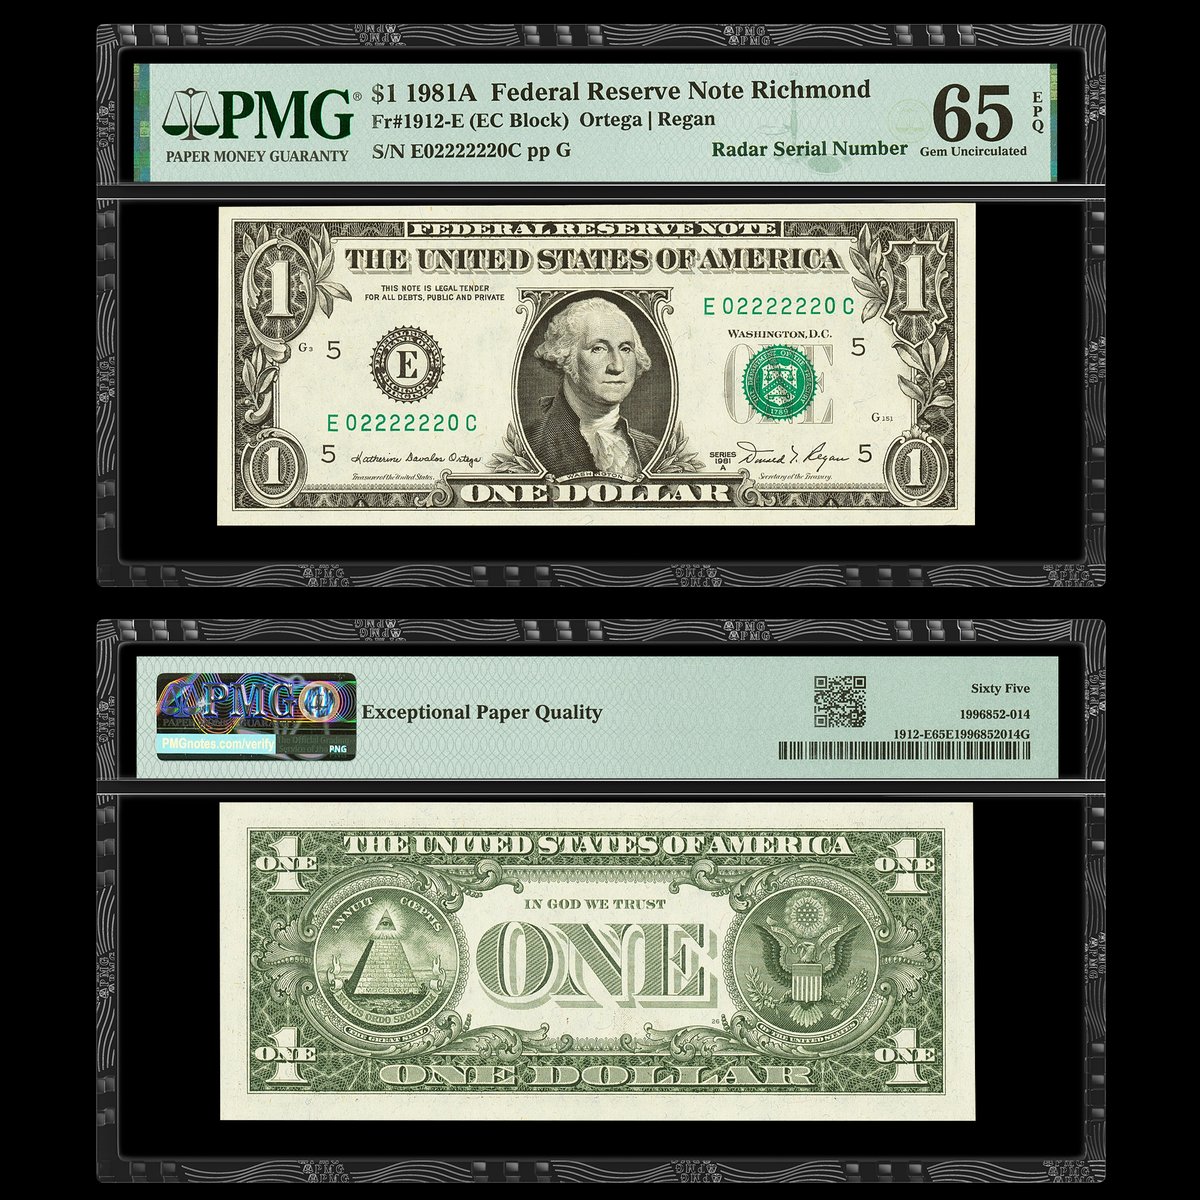 Note of the Day: Today’s #FancyFriday highlight boasts a Radar Serial Number, or a serial number that reads the same forward and backward. This PMG-certified 1981A $1 Federal Reserve Note is featured in an upcoming Heritage Auctions sale. View this lot at PMG.click/ha514